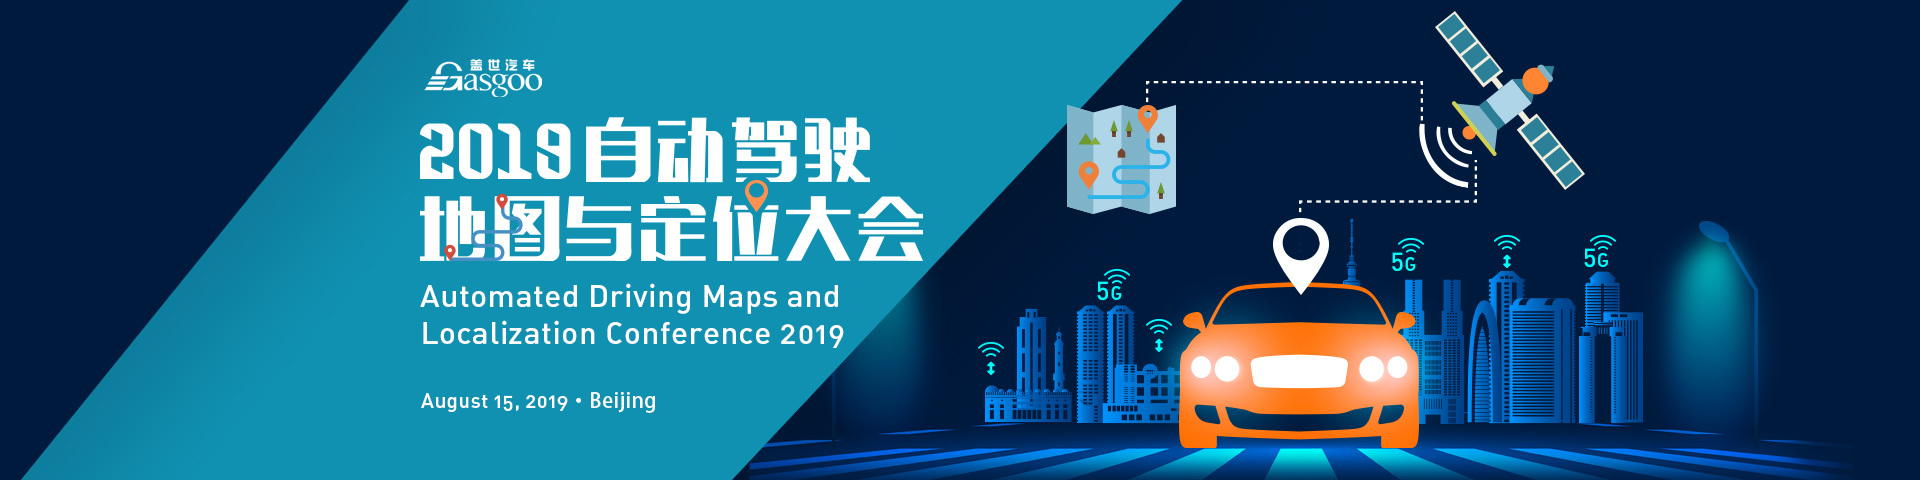 Gasgoo Automated Driving Maps and Localization Conference 2019